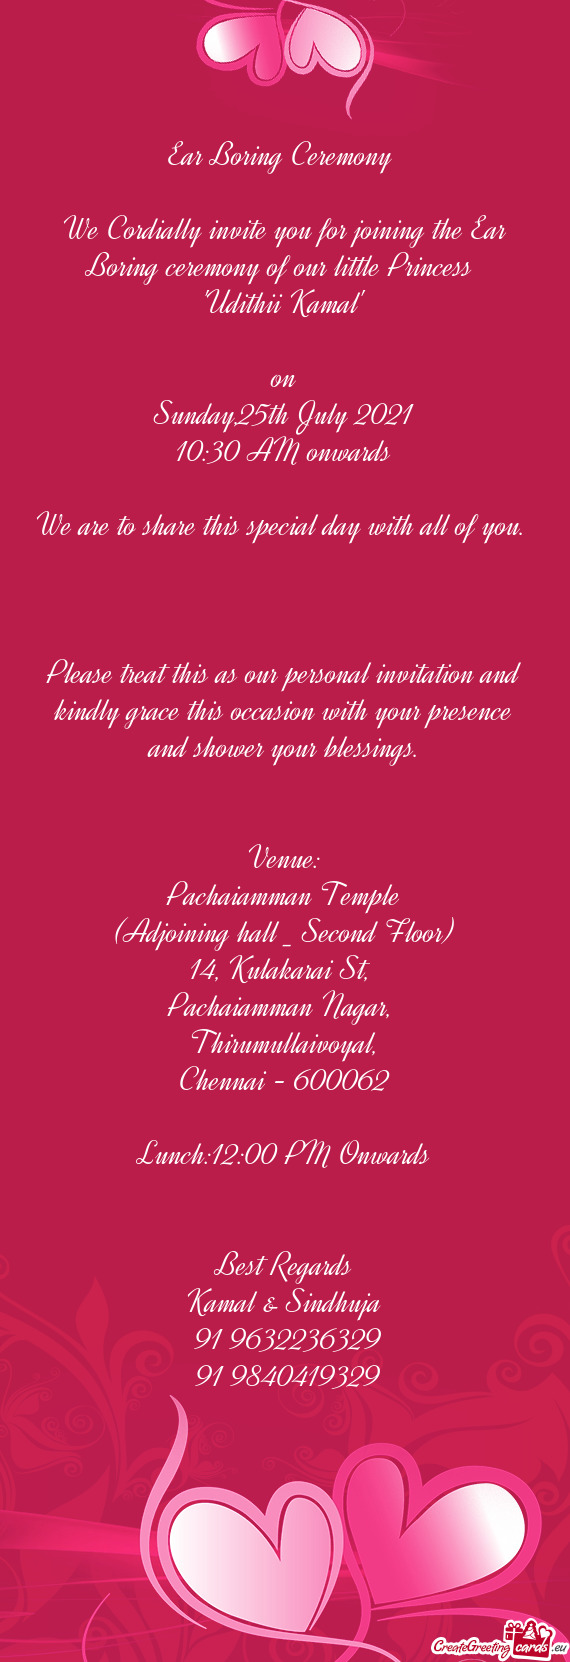 We Cordially invite you for joining the Ear Boring ceremony of our little Princess